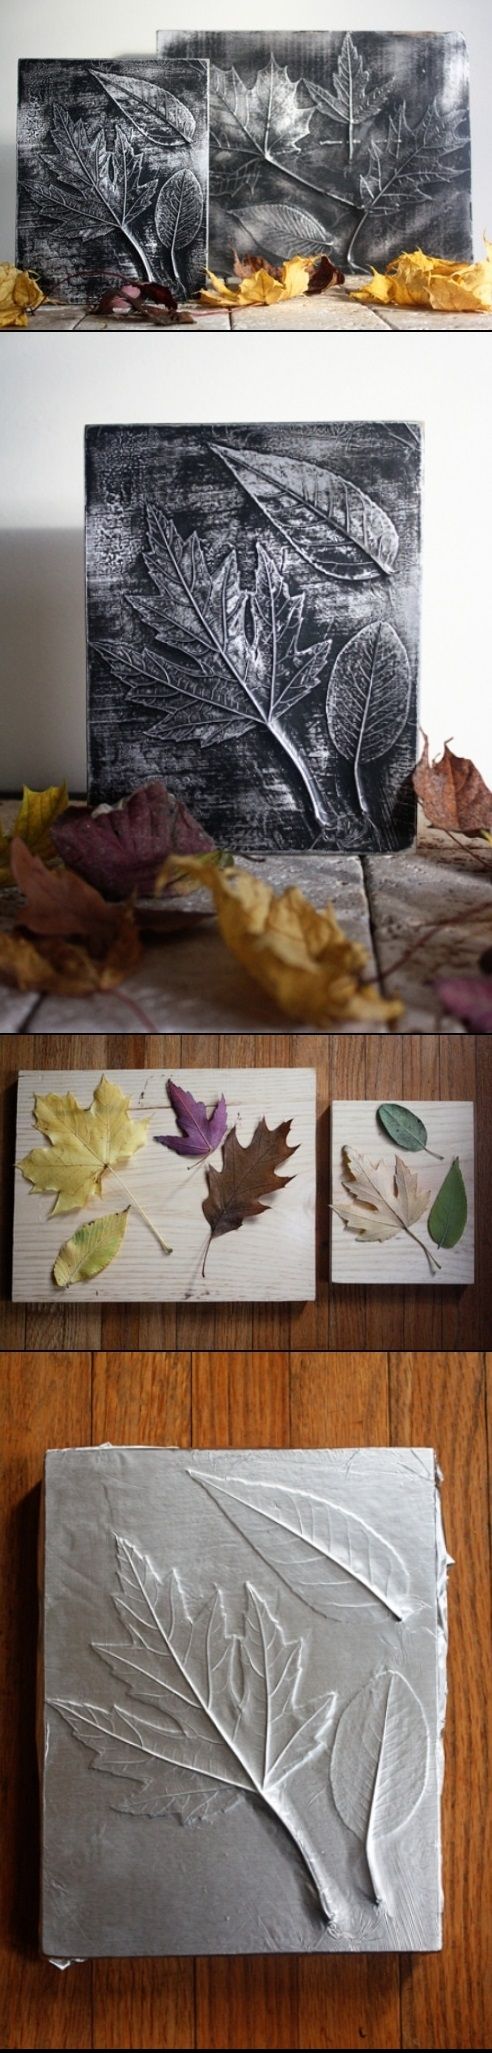 20. USE LEAVES AND METALLIC SHEETS